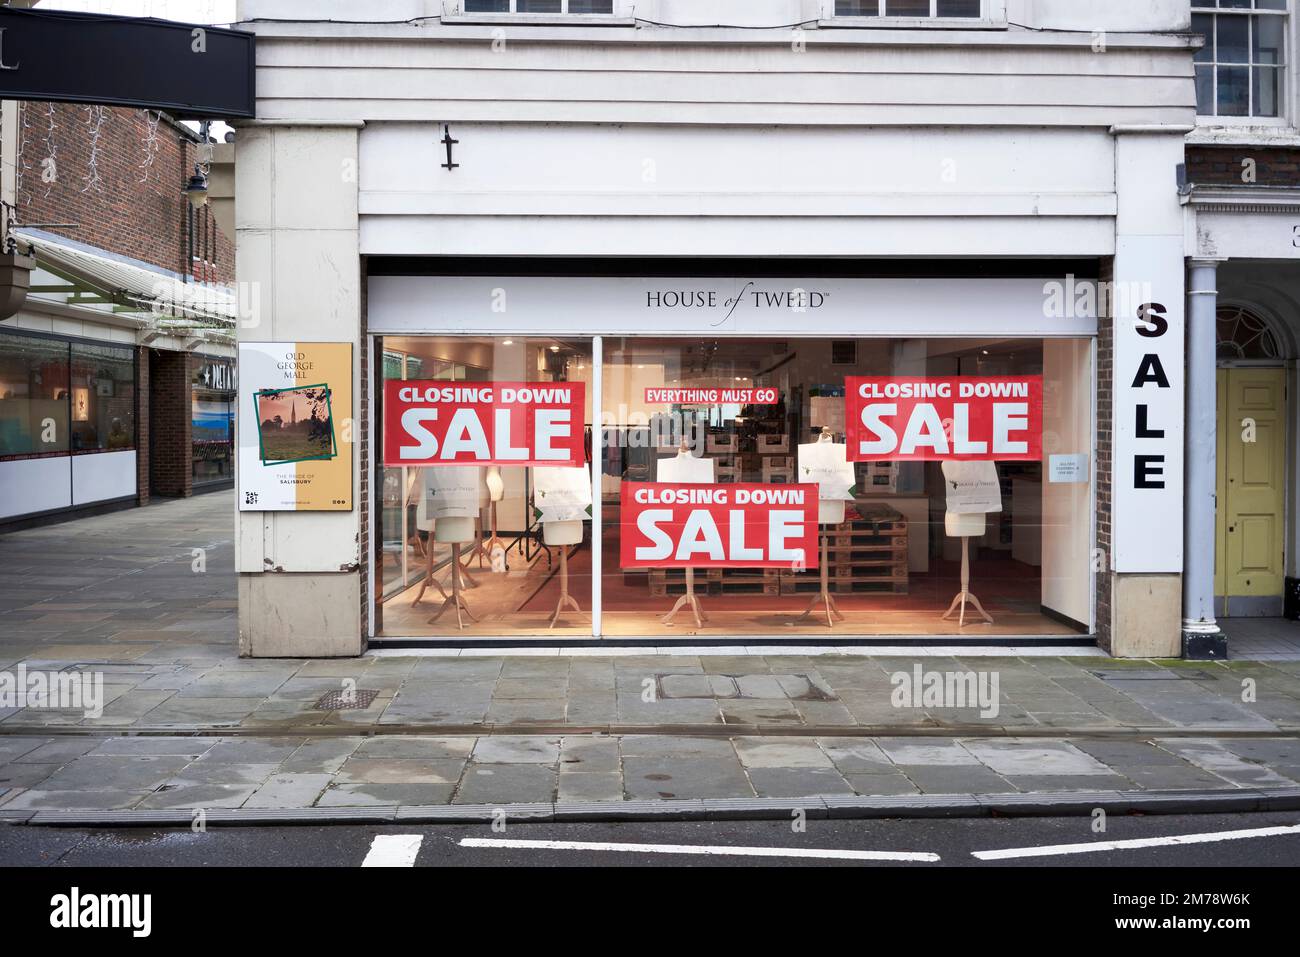 House of Tweed clothing store closing down sale Stock Photo